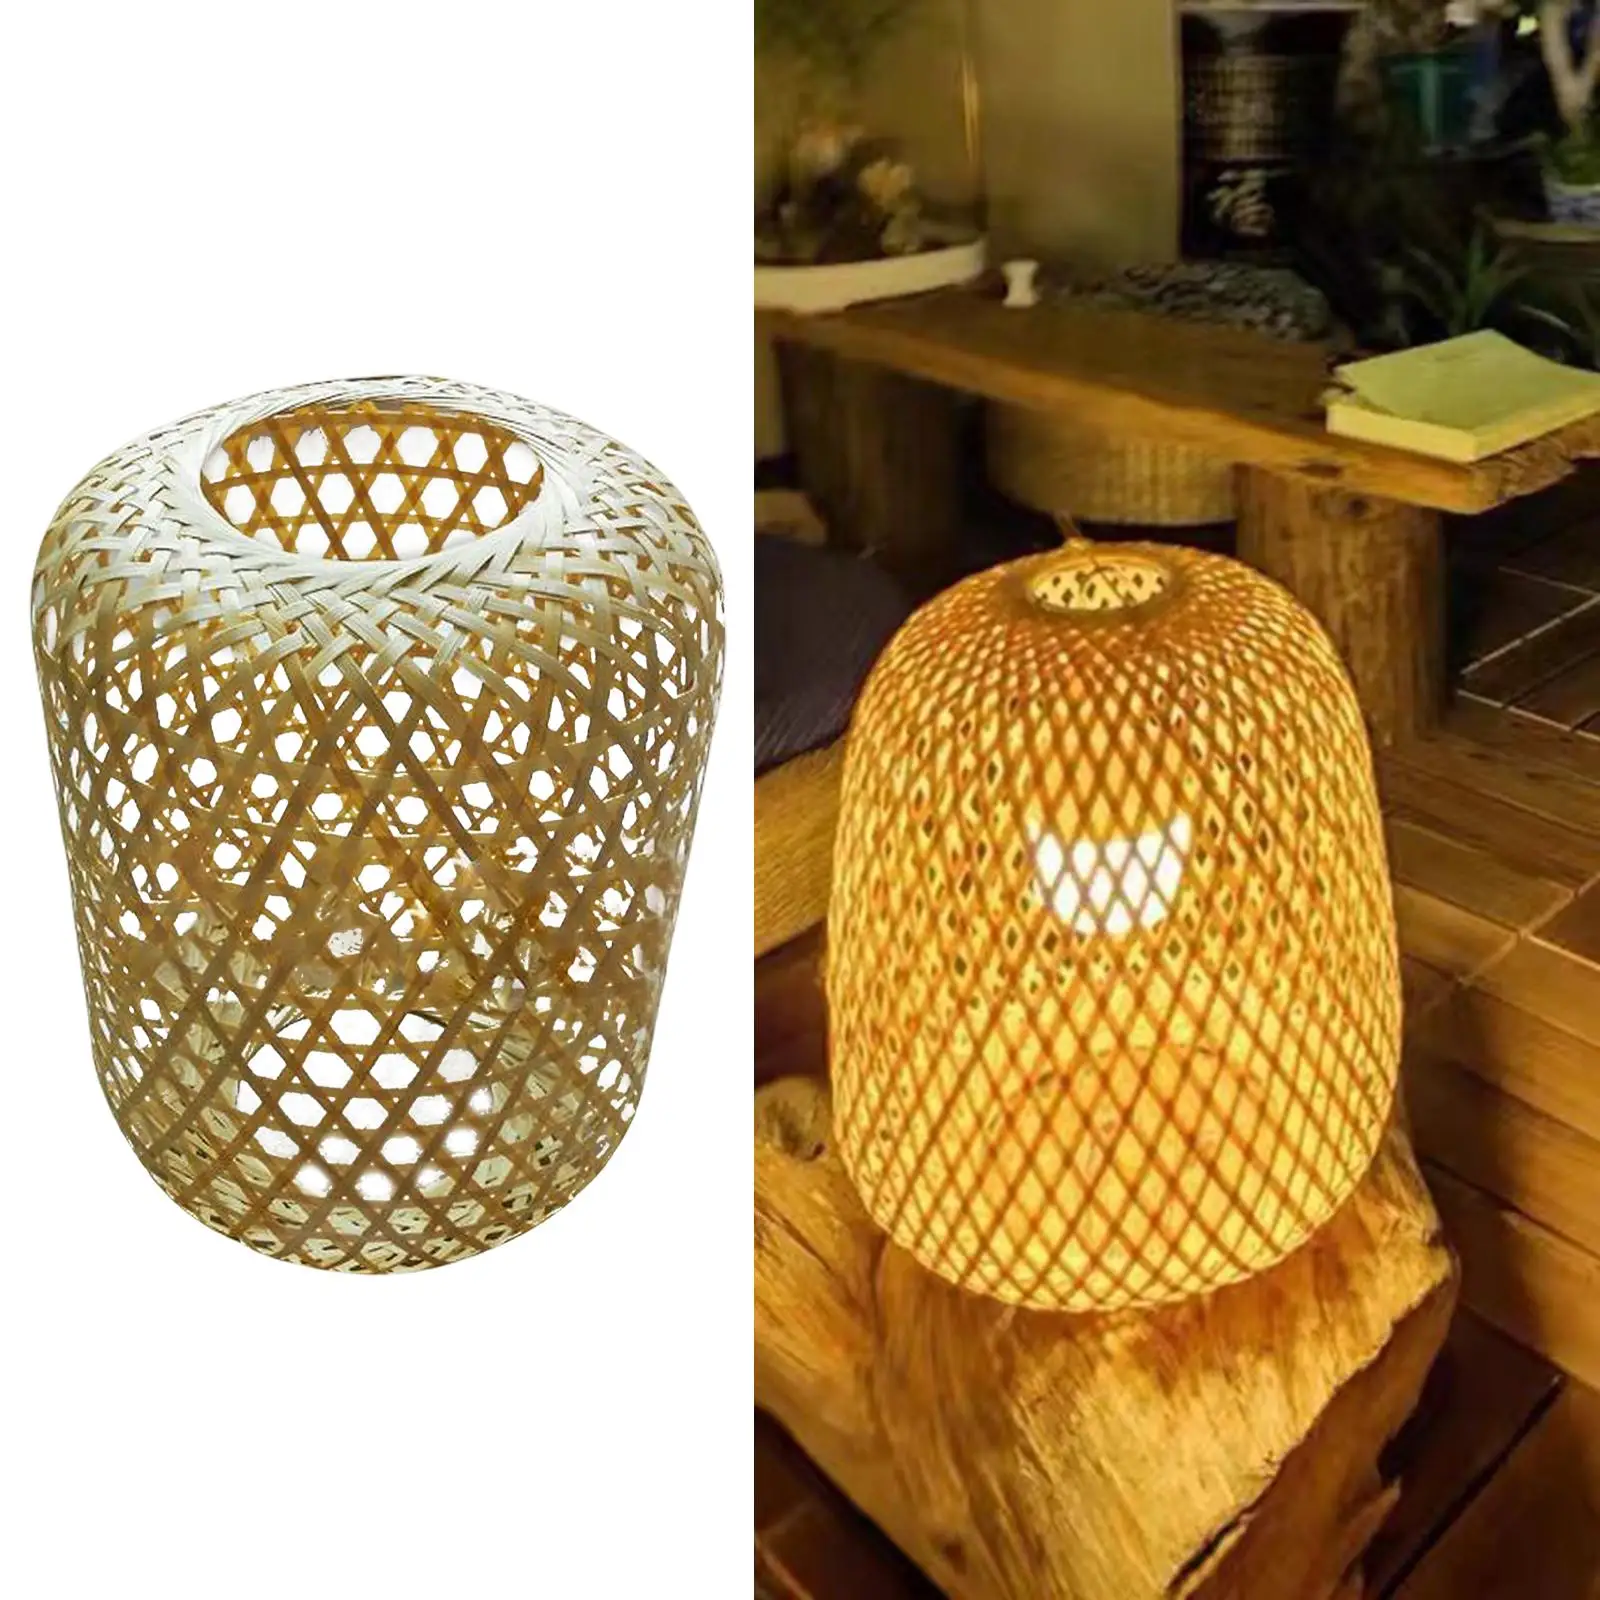 Rustic Bamboo Lamp Shade Ceiling Light Fixture Cover Pendant Light Decorative Chandelier Fitting for Bedroom Living Room Dorm